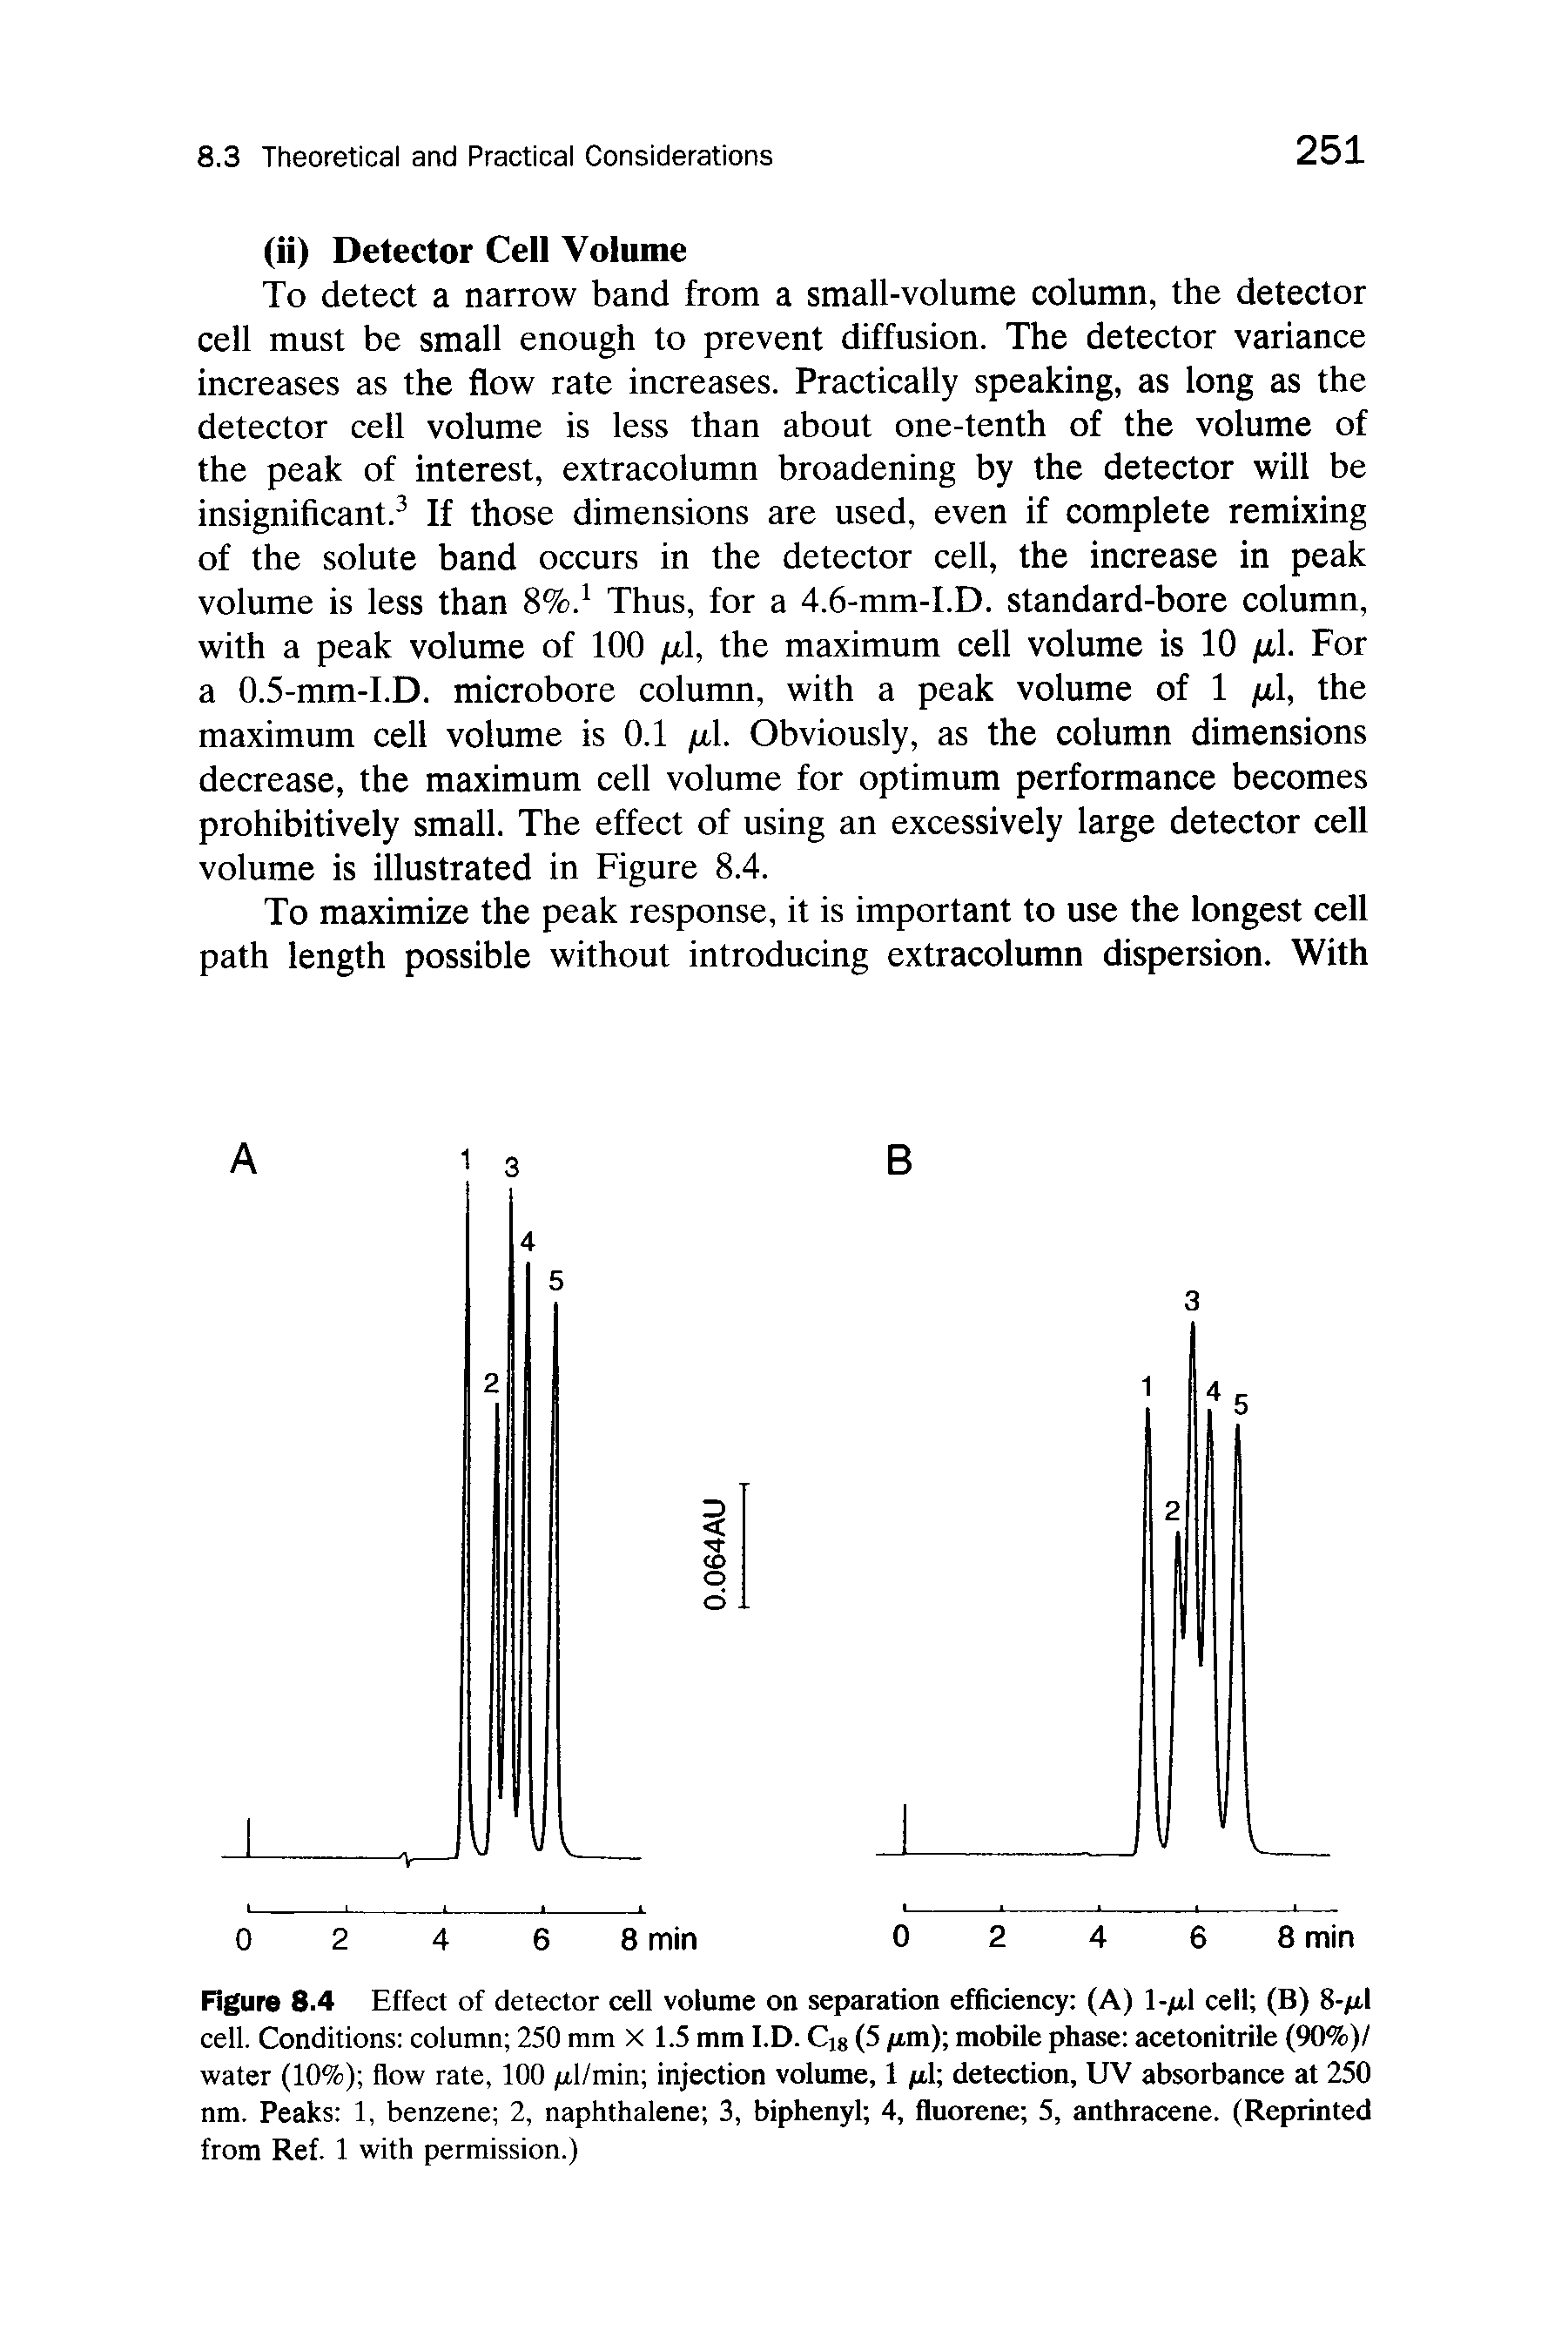 Figure 8.4 Effect of detector cell volume on separation efficiency (A) l-/xl cell (B) 8-ptl cell. Conditions column 250 mm X 1.5 mm I.D. Qg (5 fixn) mobile phase acetonitrile (90%)/ water (10%) flow rate, 100 /d/min injection volume, 1 /it detection, UV absorbance at 250 nm. Peaks 1, benzene 2, naphthalene 3, biphenyl 4, fluorene 5, anthracene. (Reprinted from Ref. 1 with permission.)...